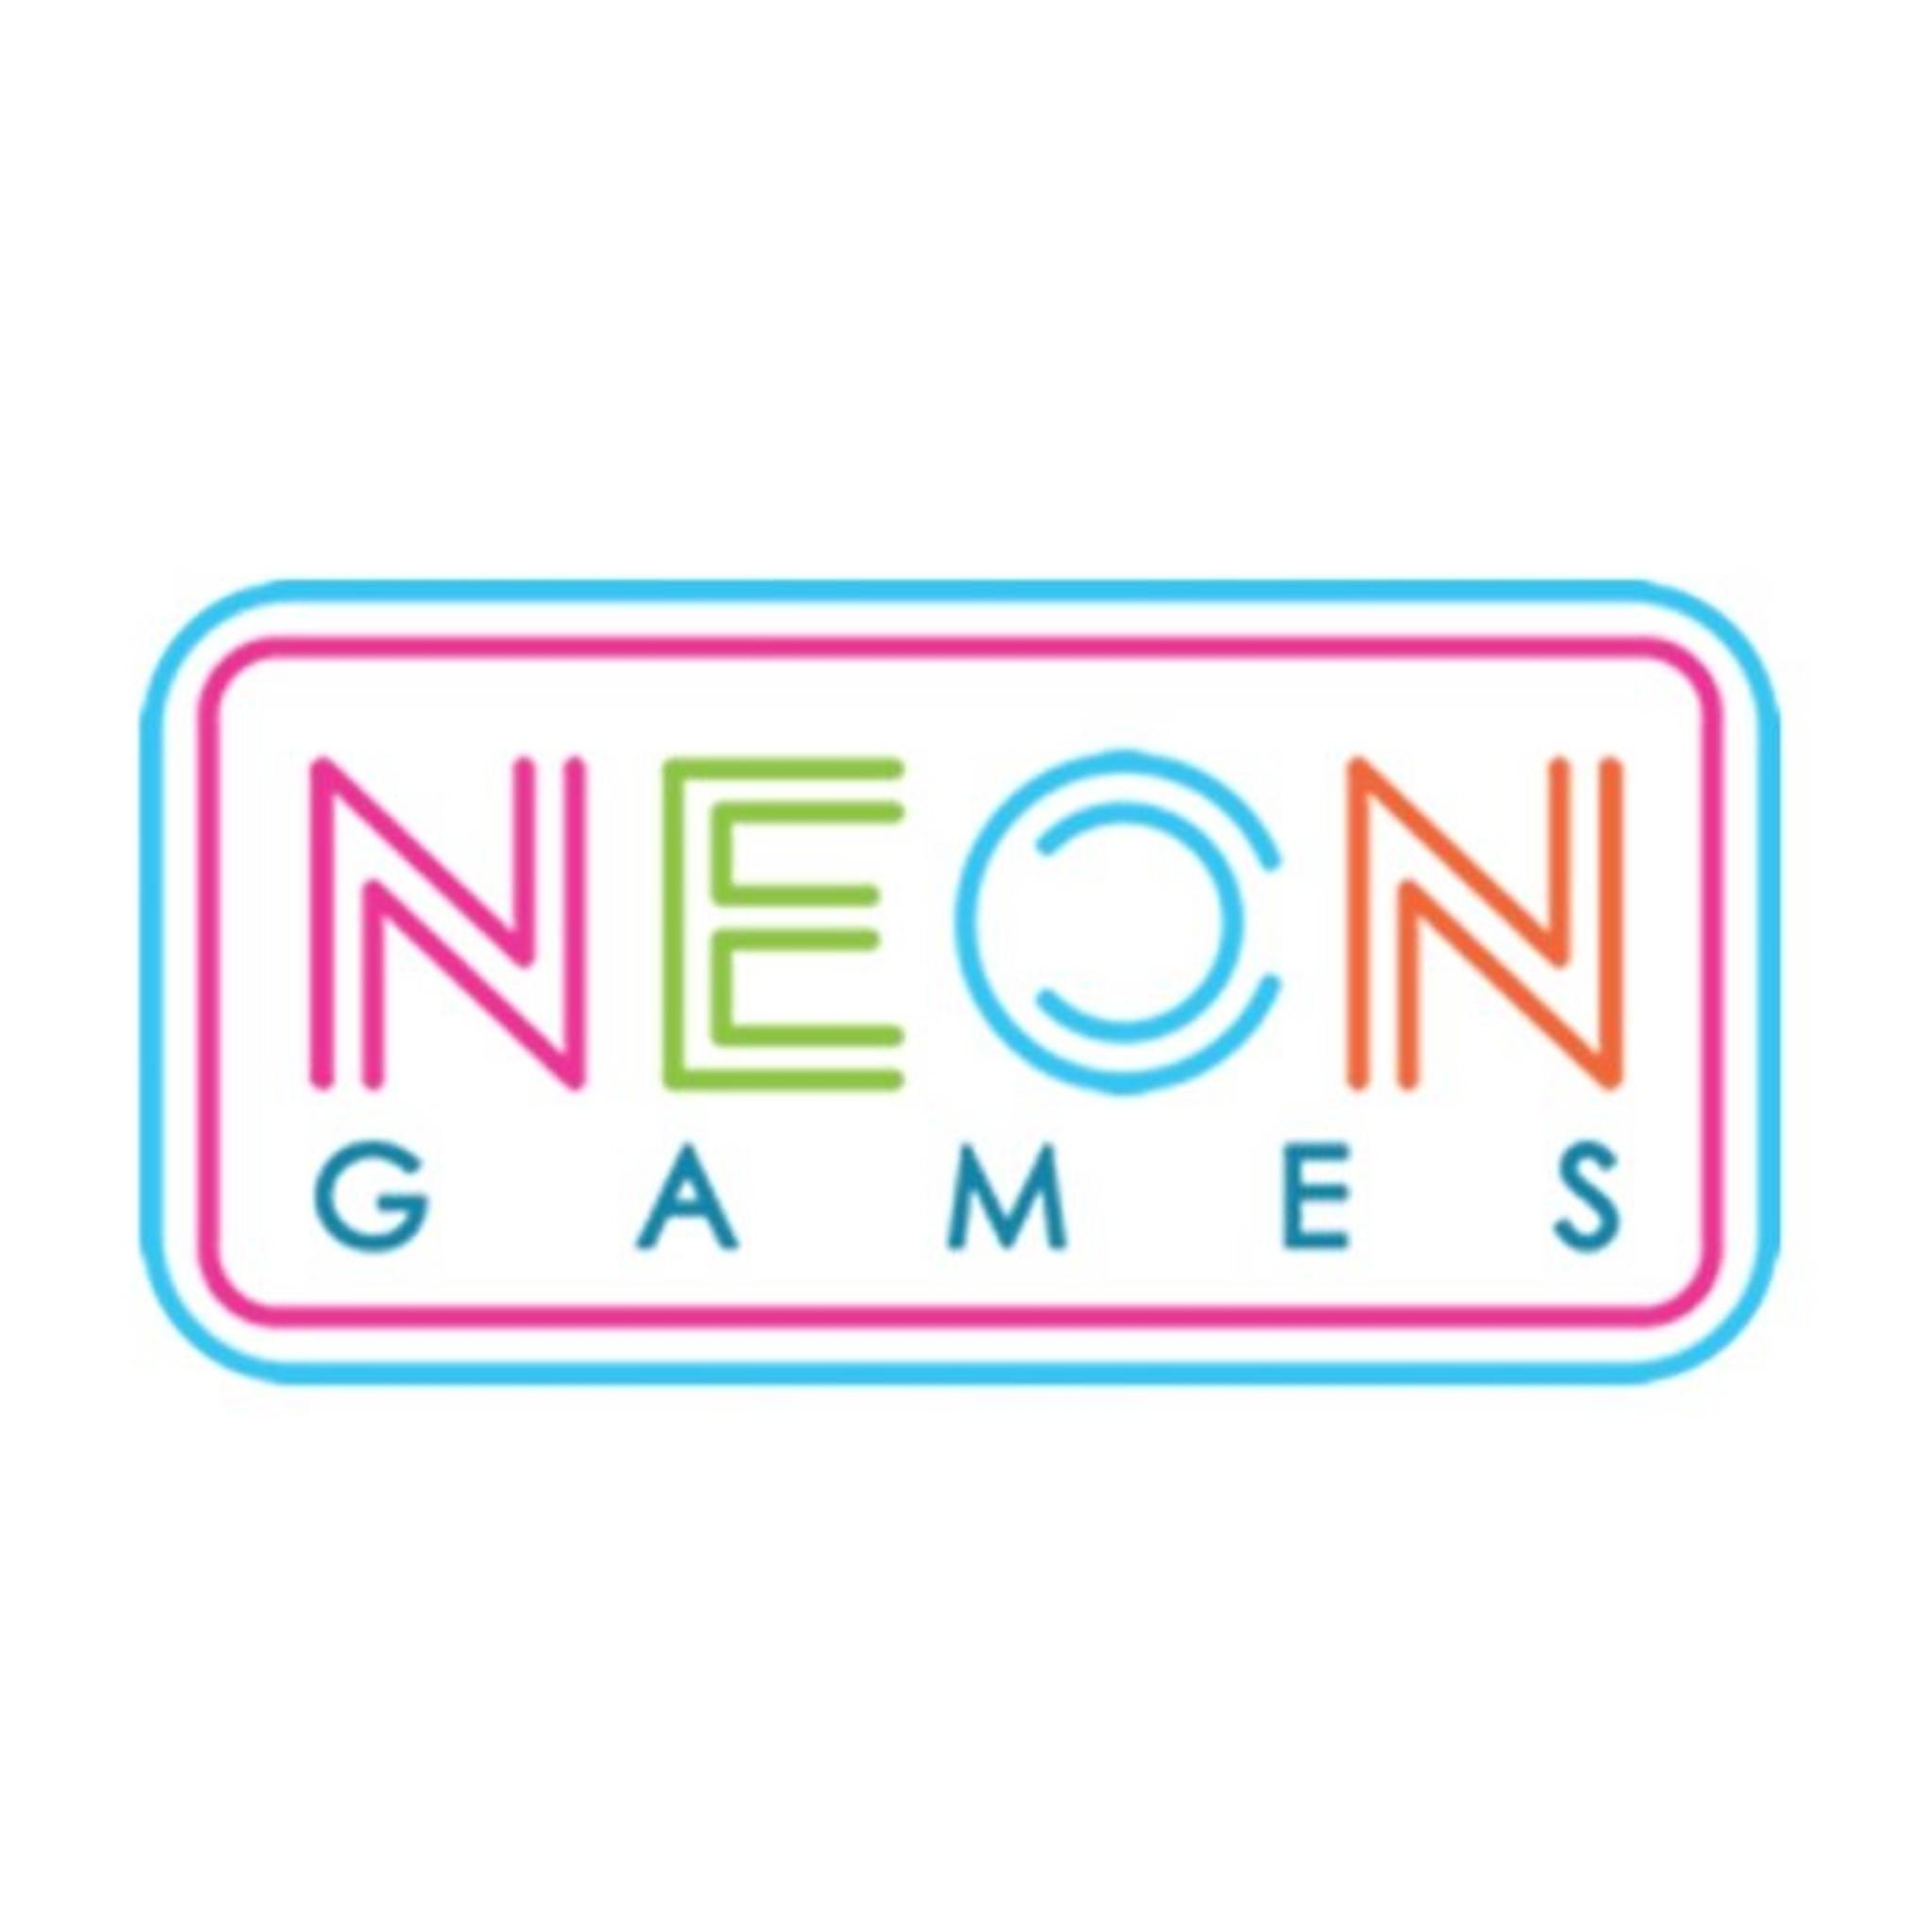 Neoon Games Card - 6400 points